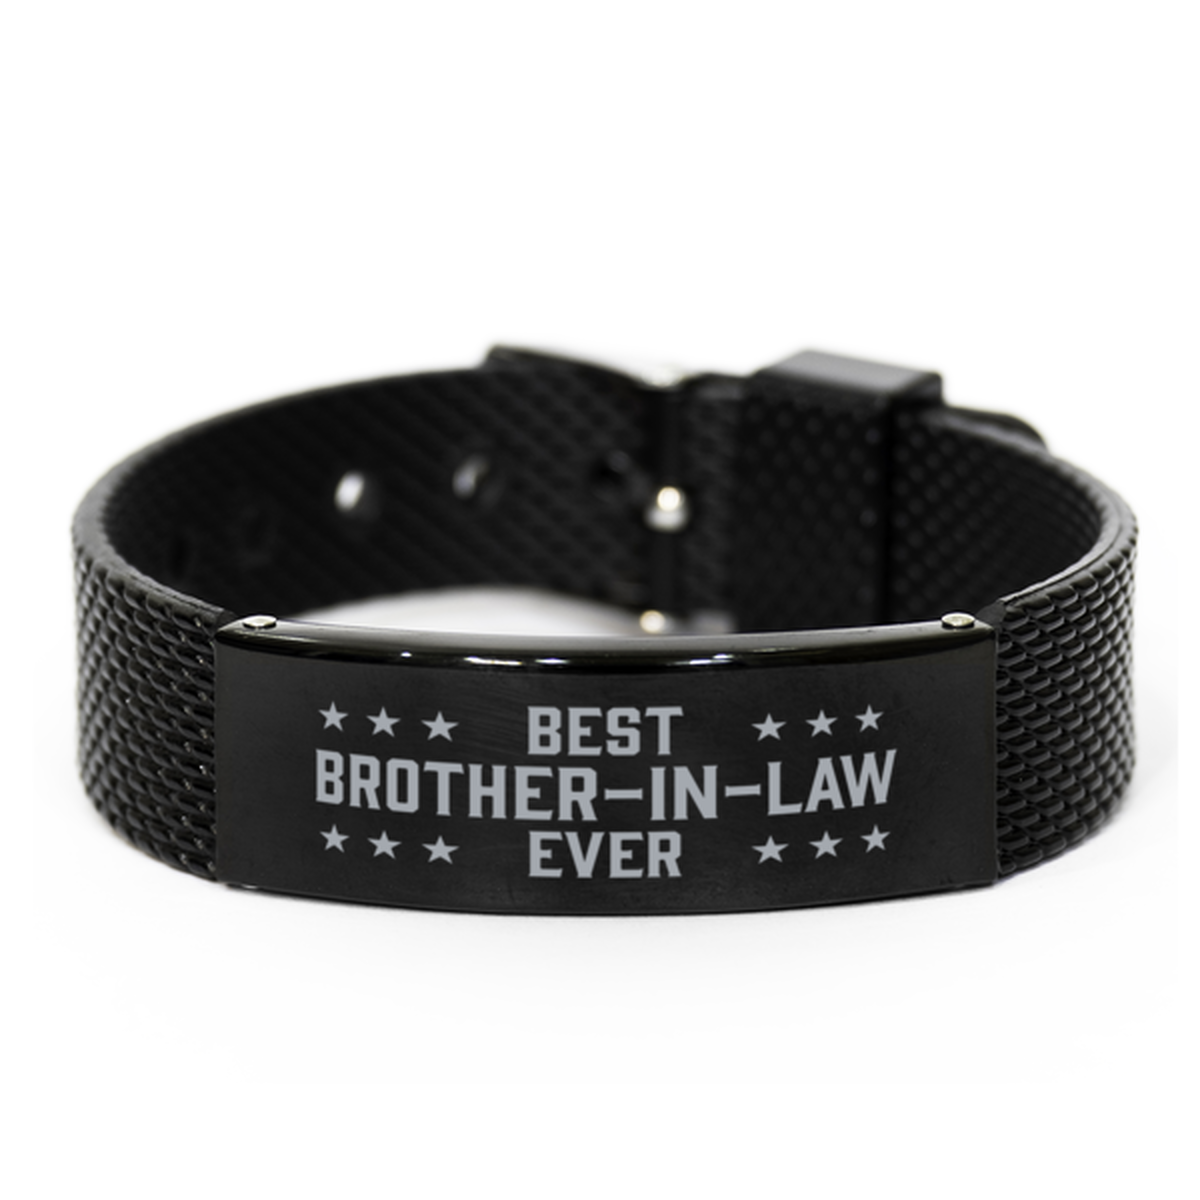 Best Brother-in-law Ever Brother-in-law Gifts, Gag Engraved Bracelet For Brother-in-law, Best Family Gifts For Men